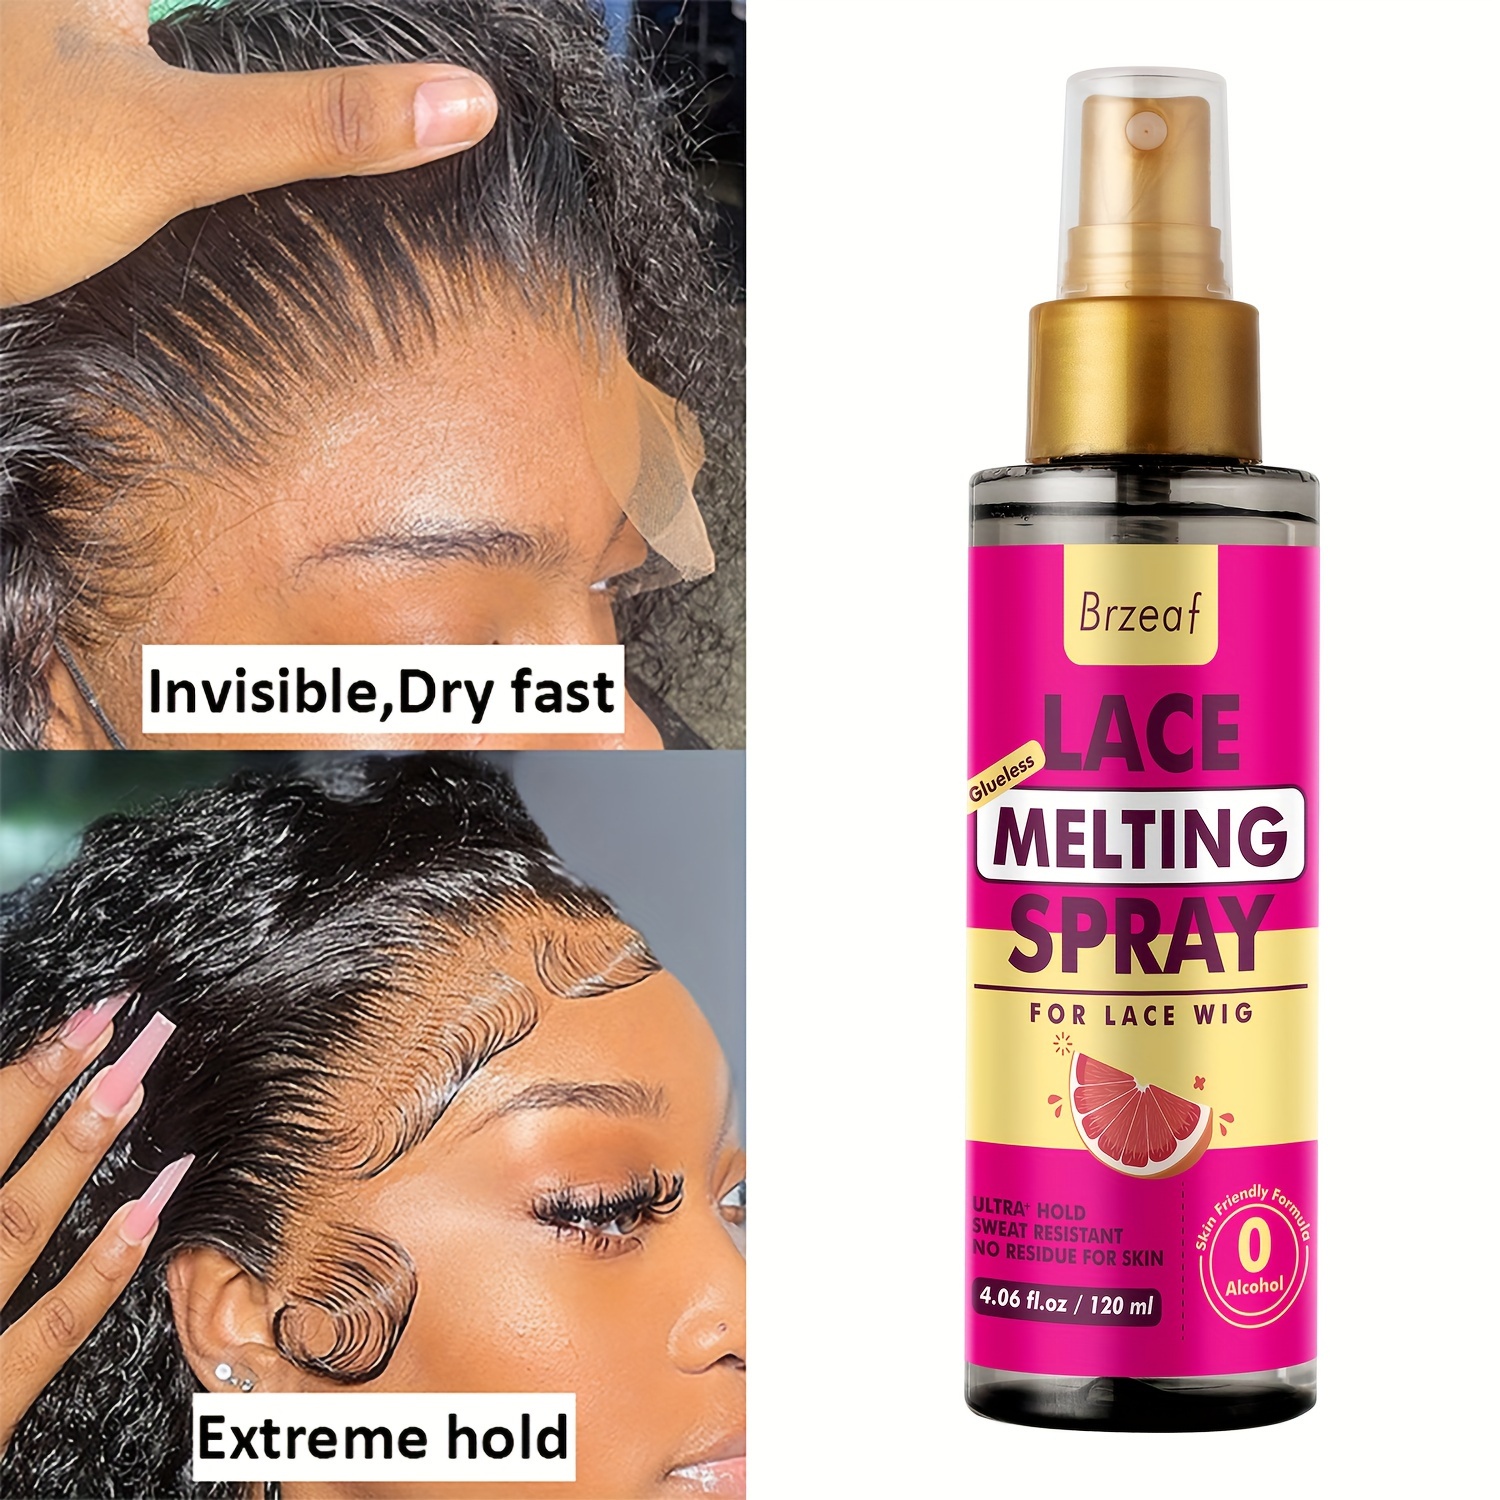 Lace Melting Spray, Lace Wig Melting Spray ,Strong Natural Finishing Hold, Wig Melting Spray & Hair Adhesive for Wigs,Wig Adhesive Glue Lace Front